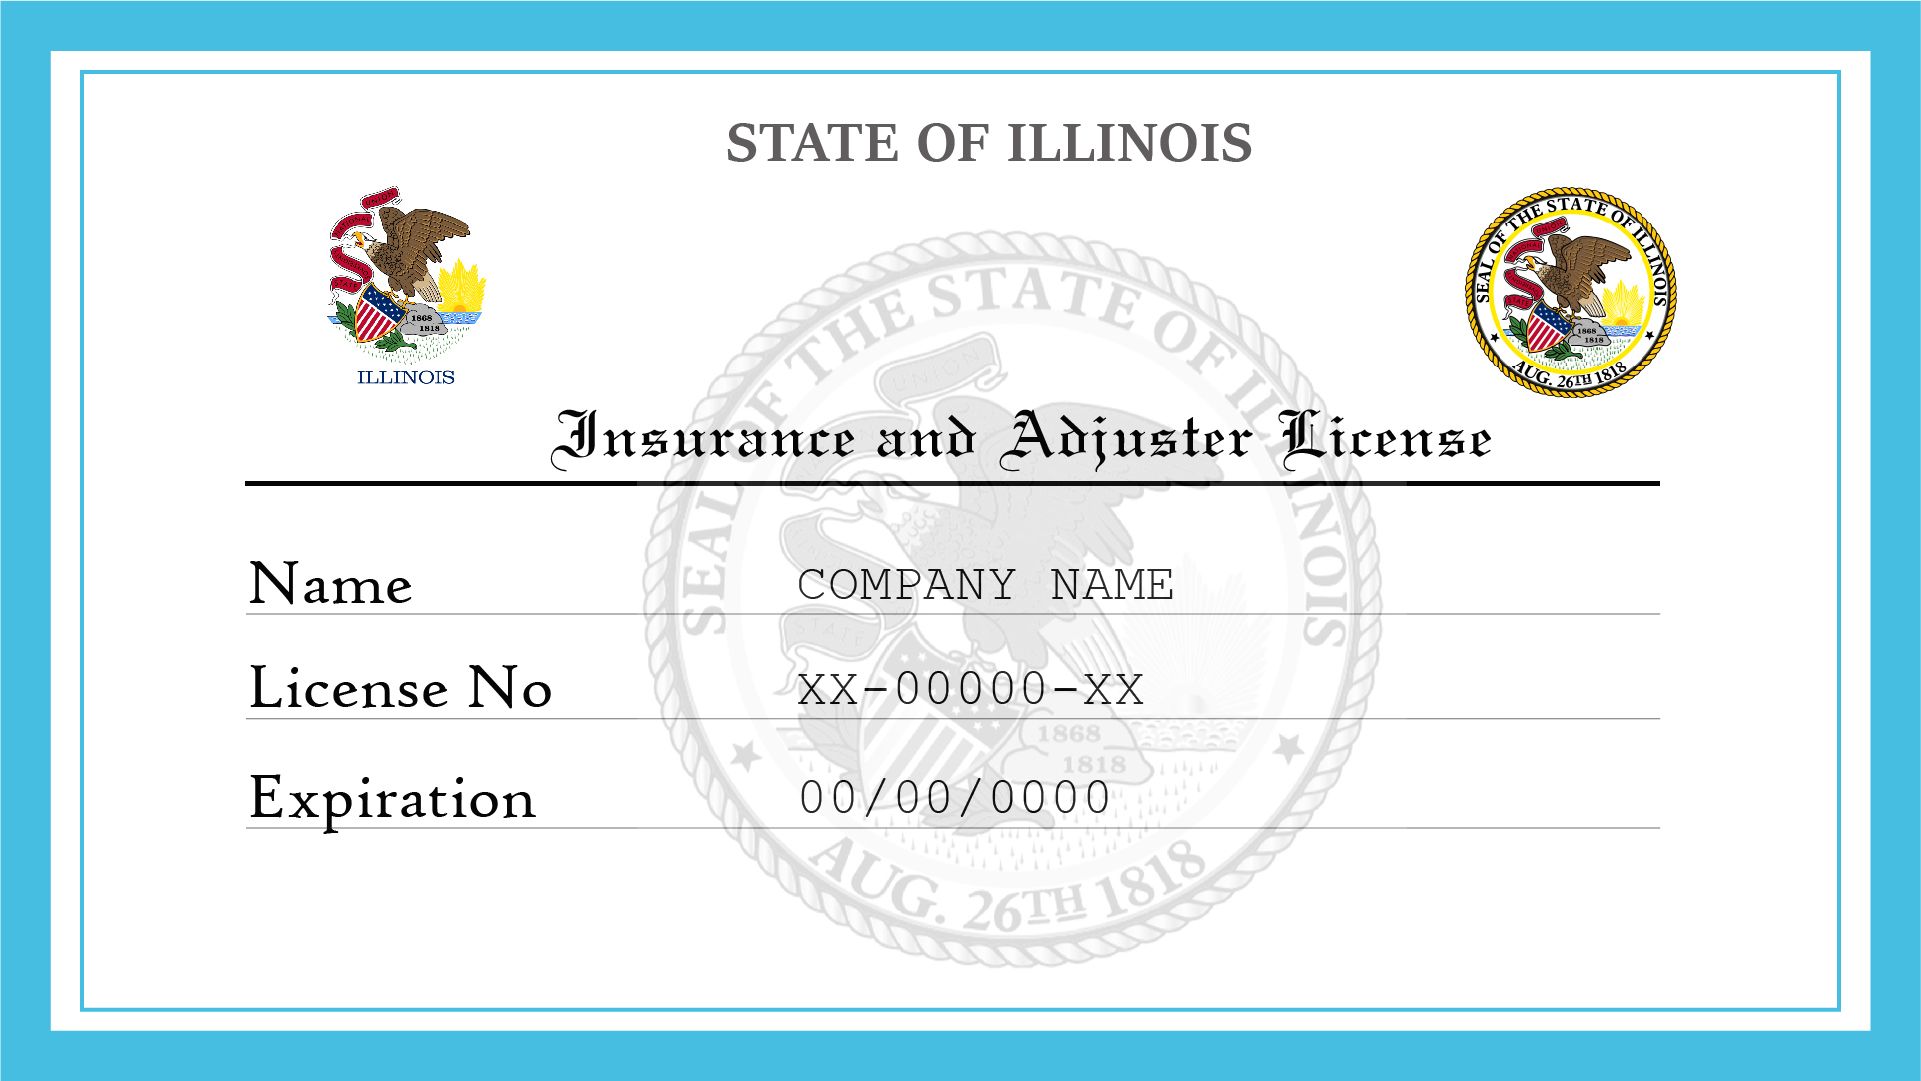 Illinois Insurance and Adjuster License License Lookup